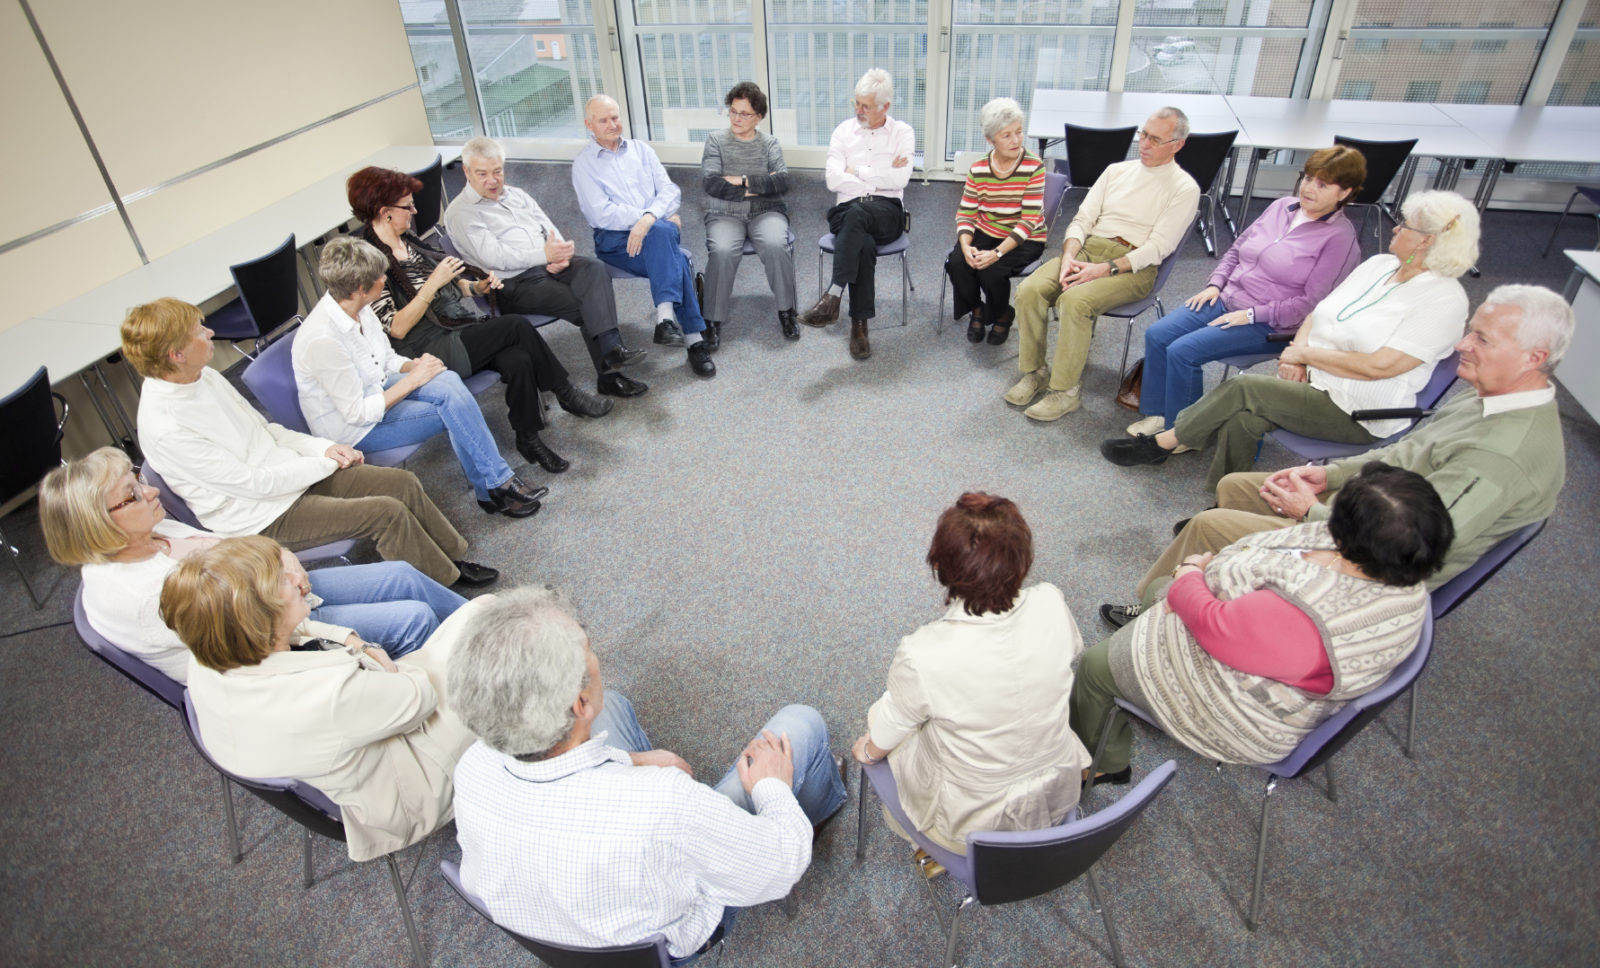 Discussion group seated on chairs in a circle